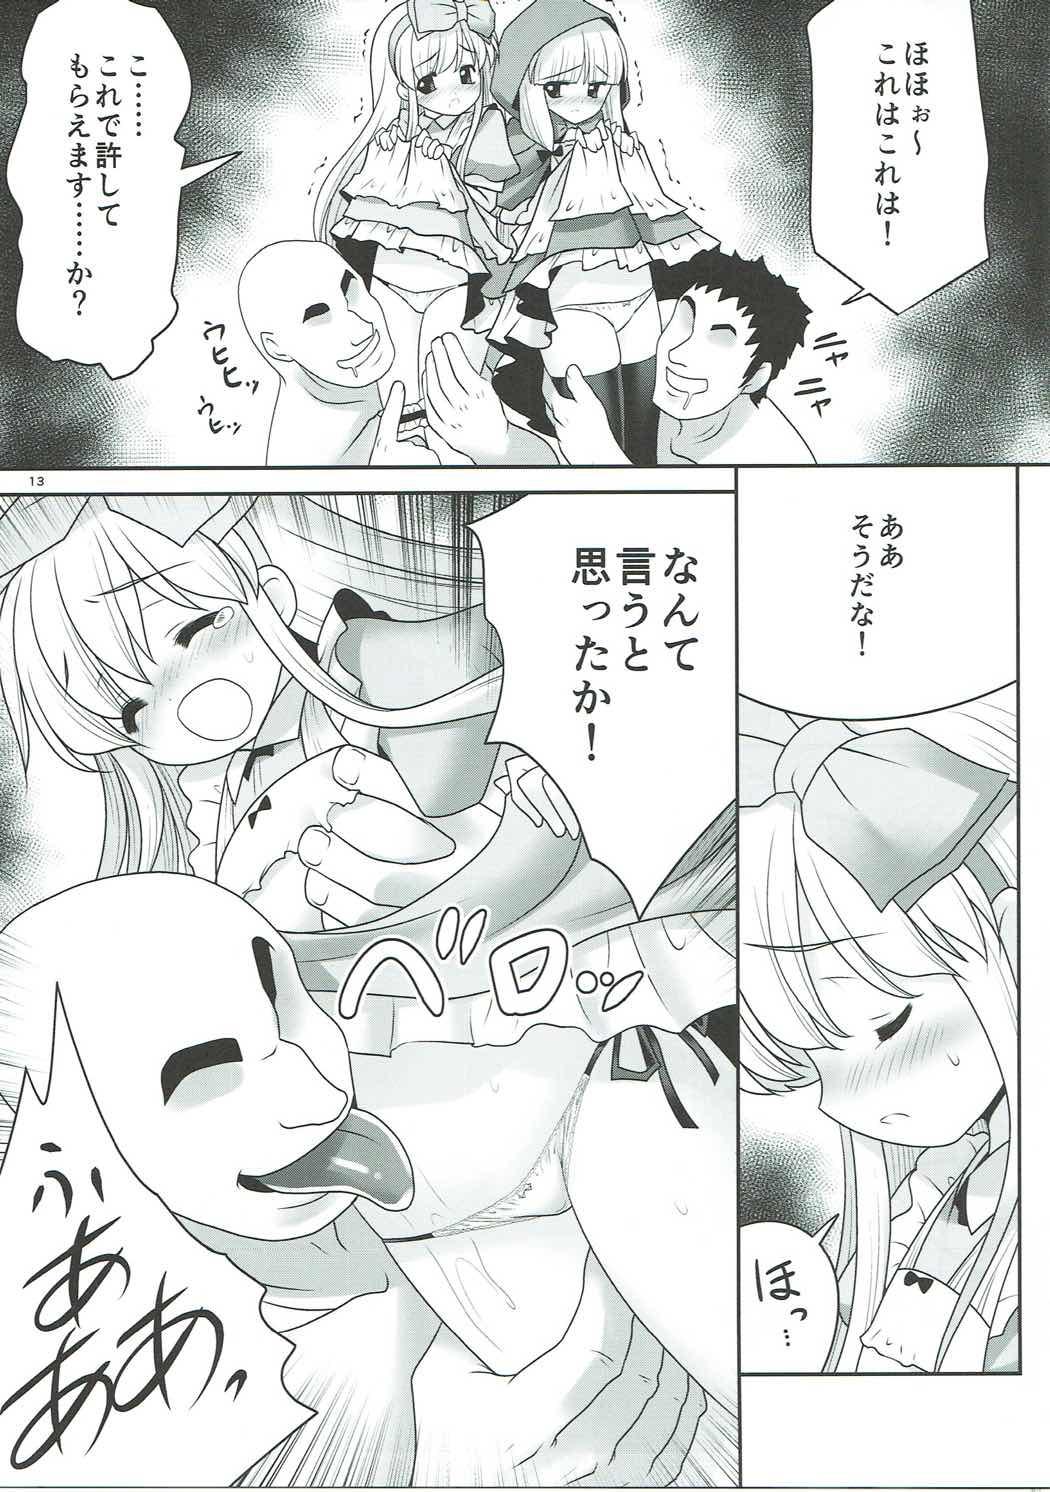 Foot Worship Osoware Nureru Ehon no Shoujo - Little red riding hood Alice in the country of hearts Roundass - Page 12